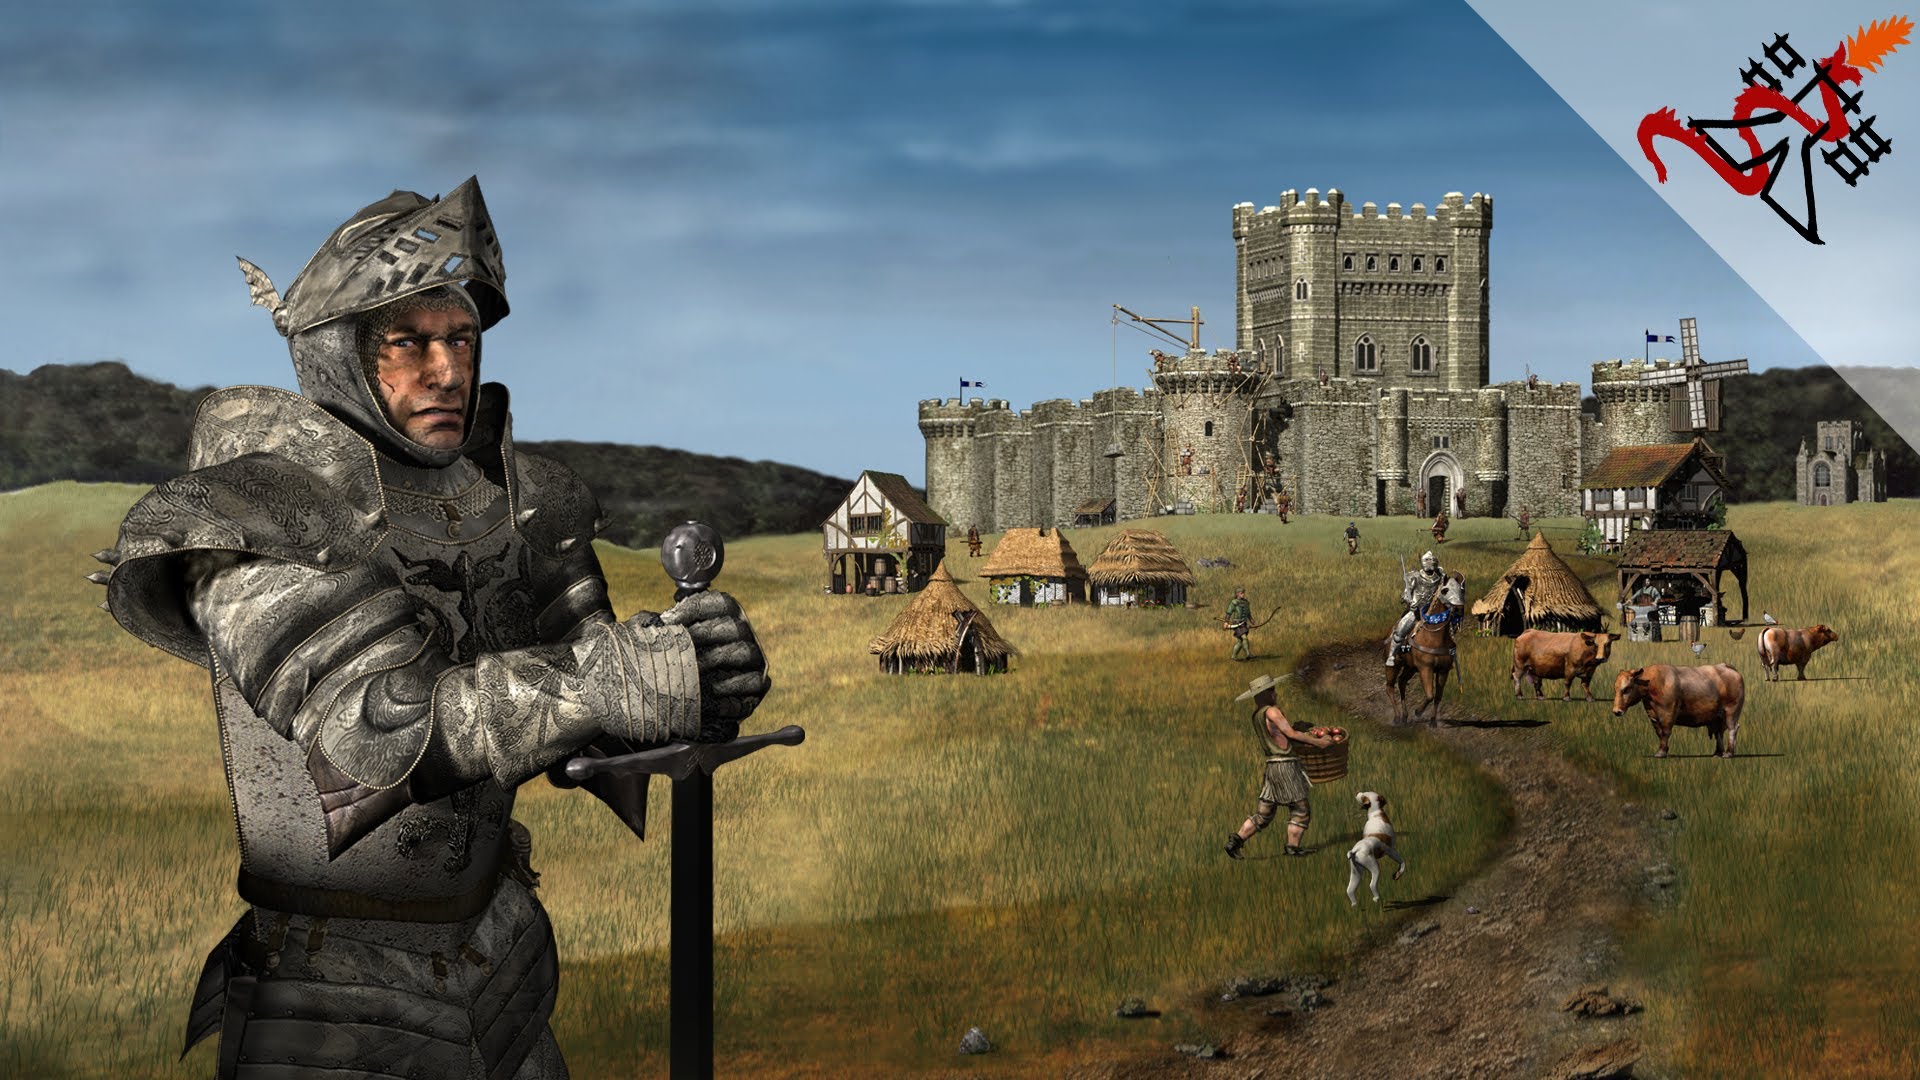 Nice Images Collection: Stronghold Desktop Wallpapers